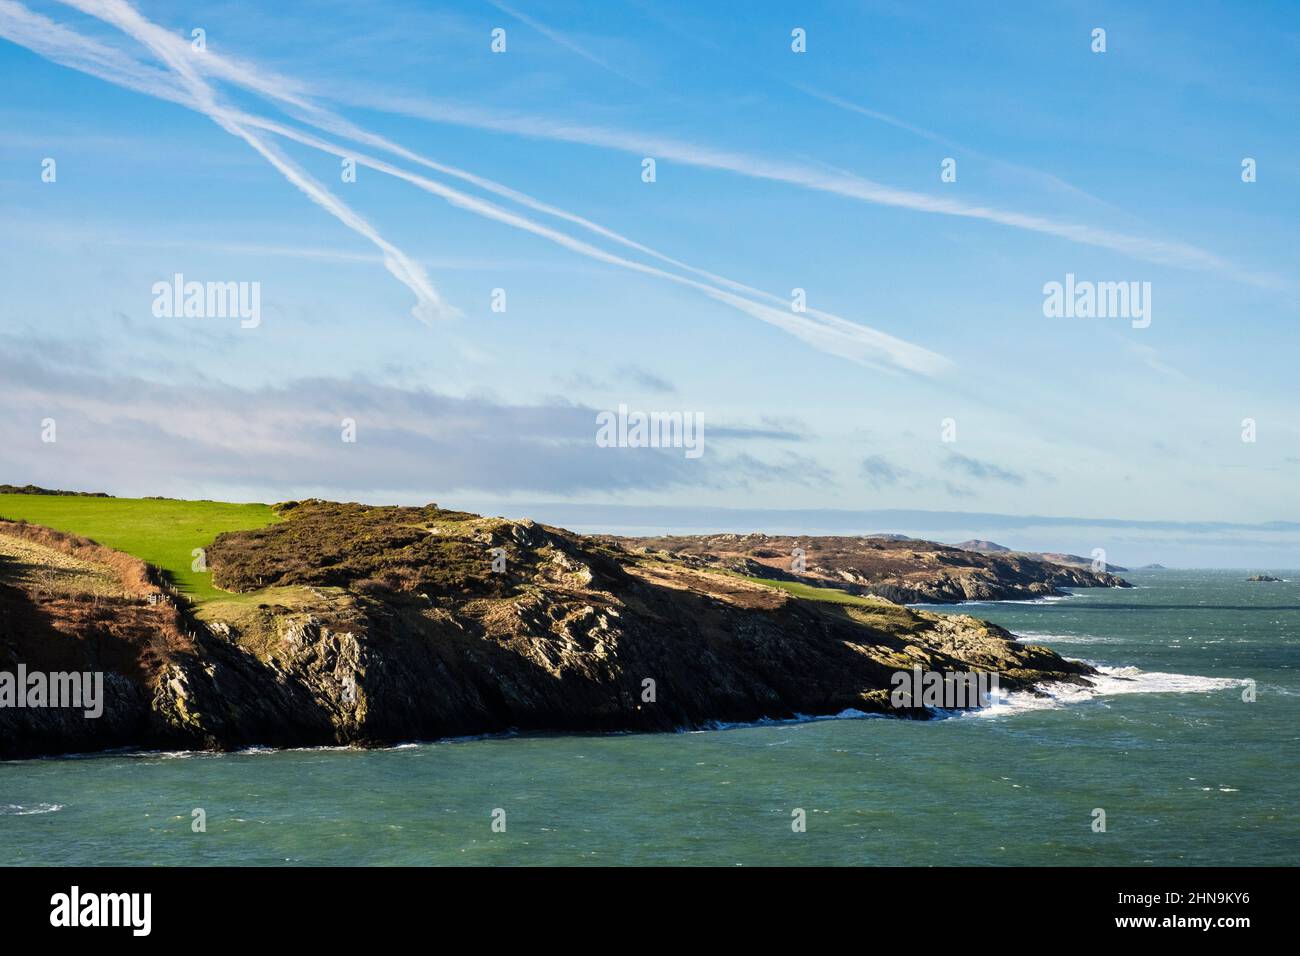 View across Porth Eilian from Point Lynas. Llaneilian, Amlwch, Isle of Anglesey, north Wales, UK, Britain Stock Photo